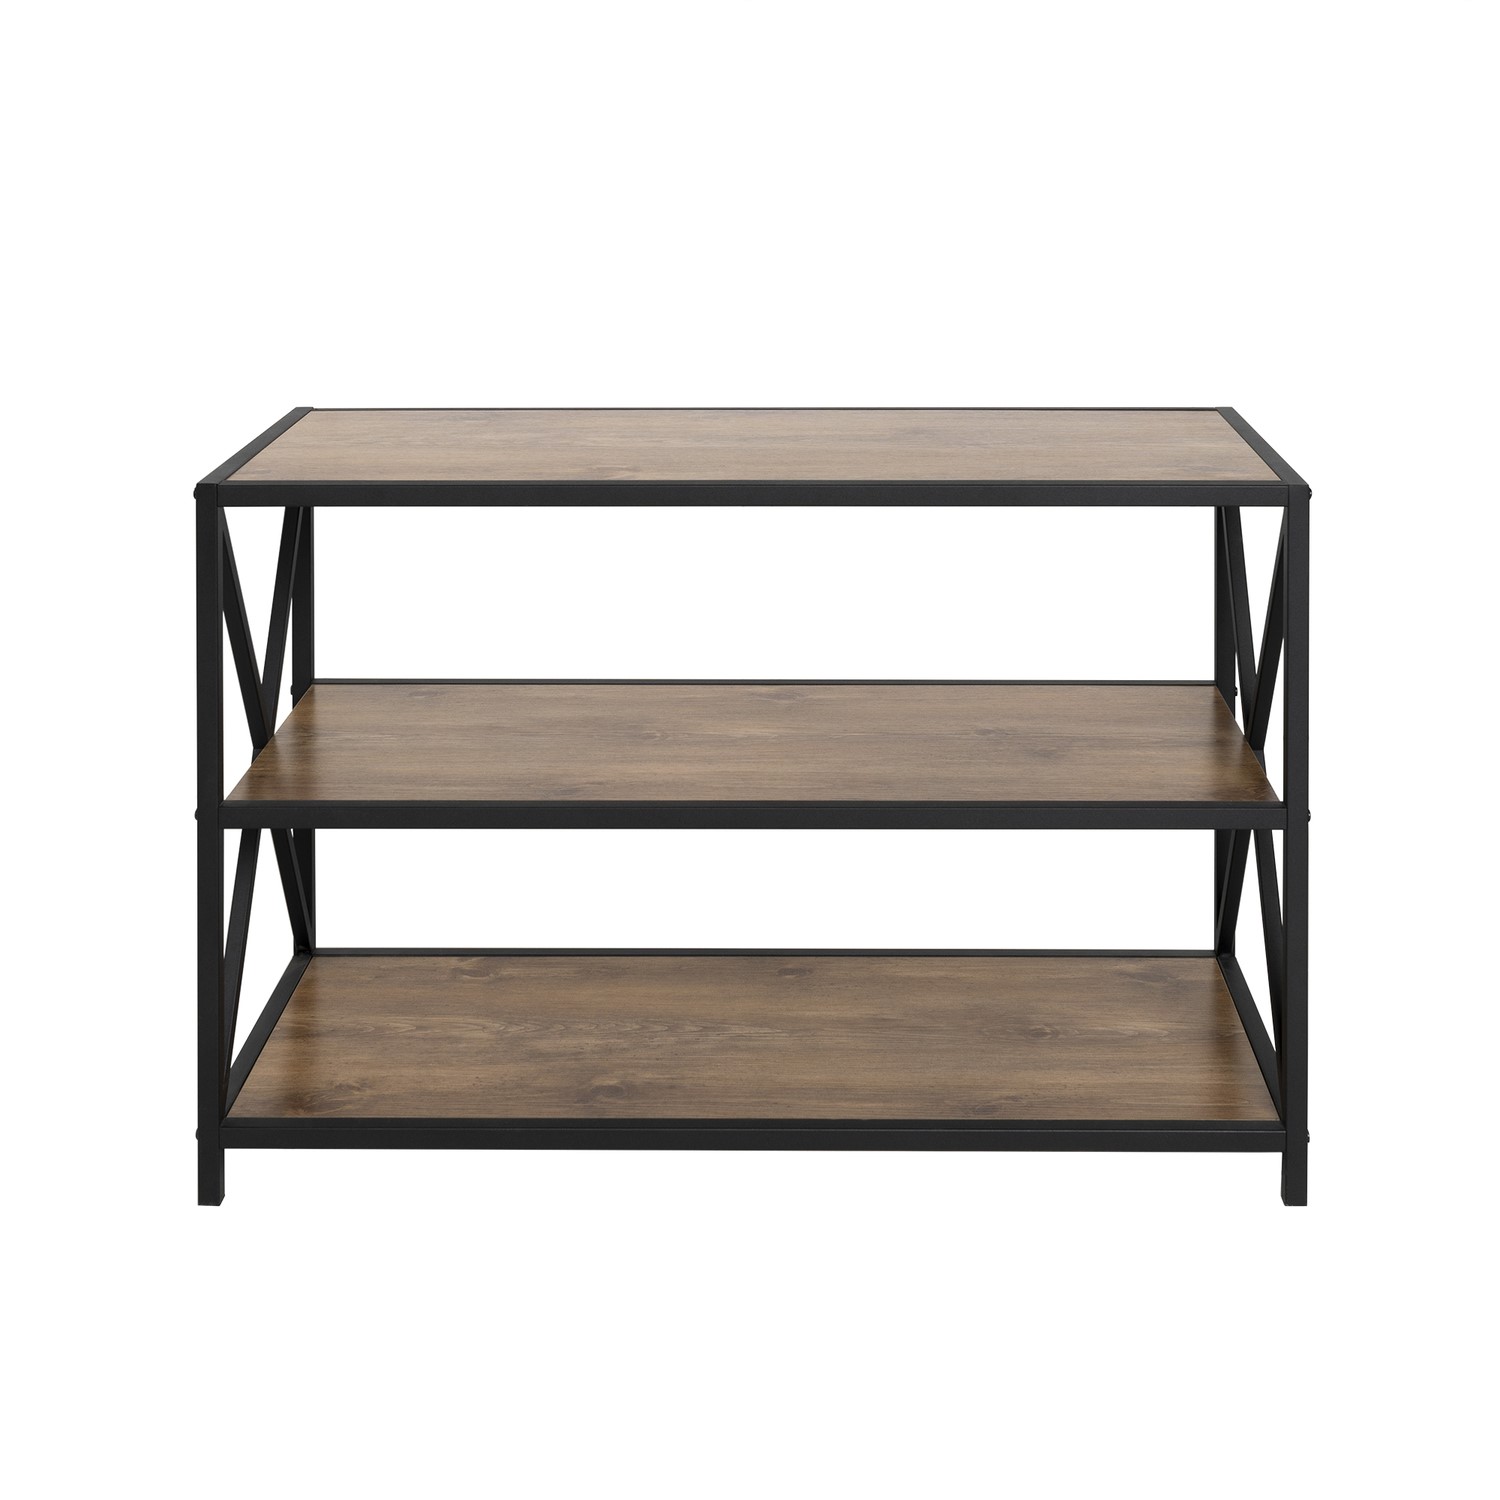 Wood Low Bookcase With Metal Frame, Metal Frame Bookcase Uk